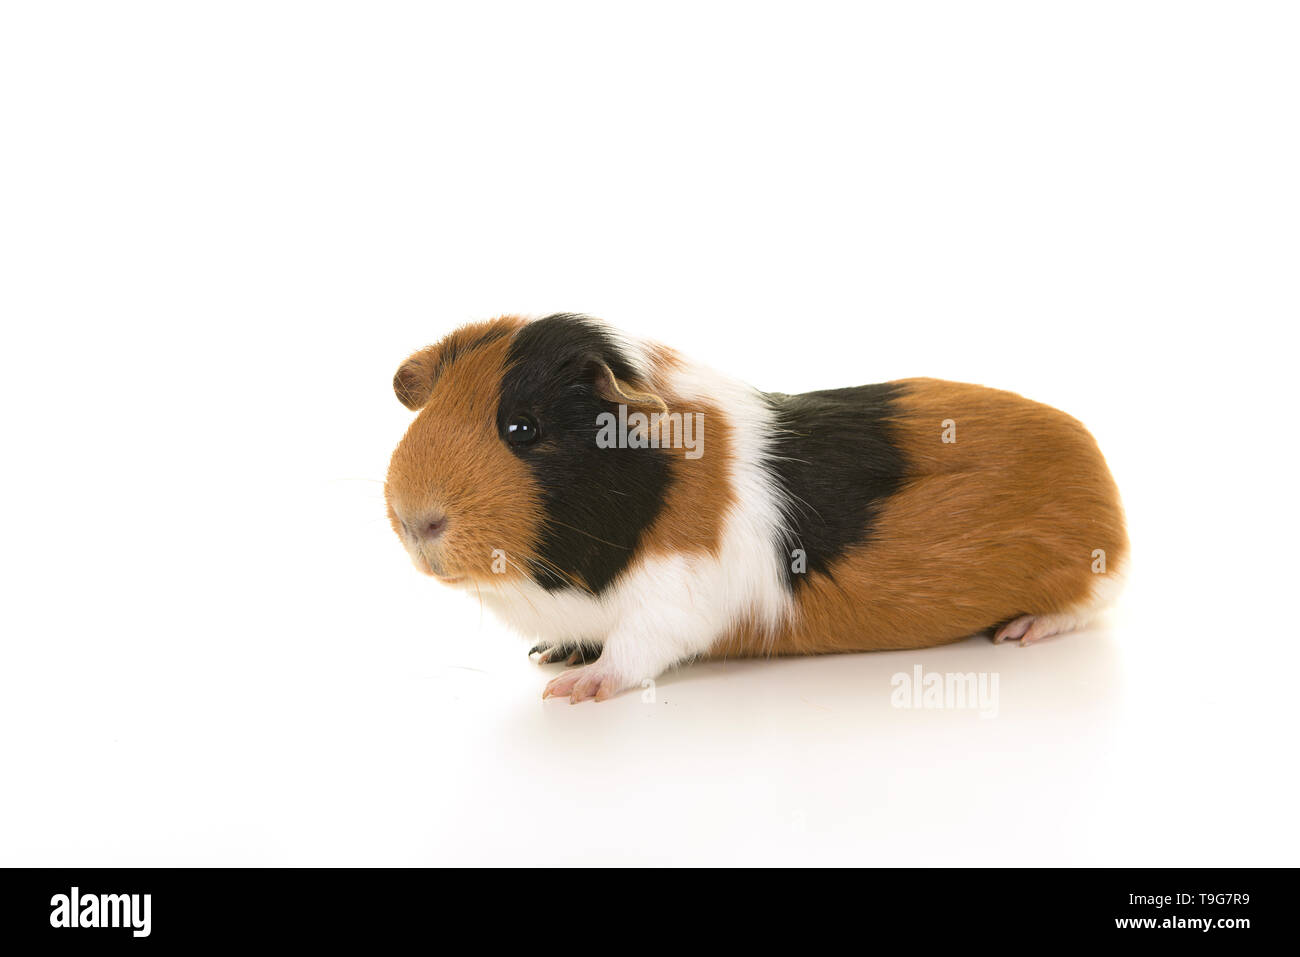 Smooth haired guinea pig seen from the side on a white background Stock Photo